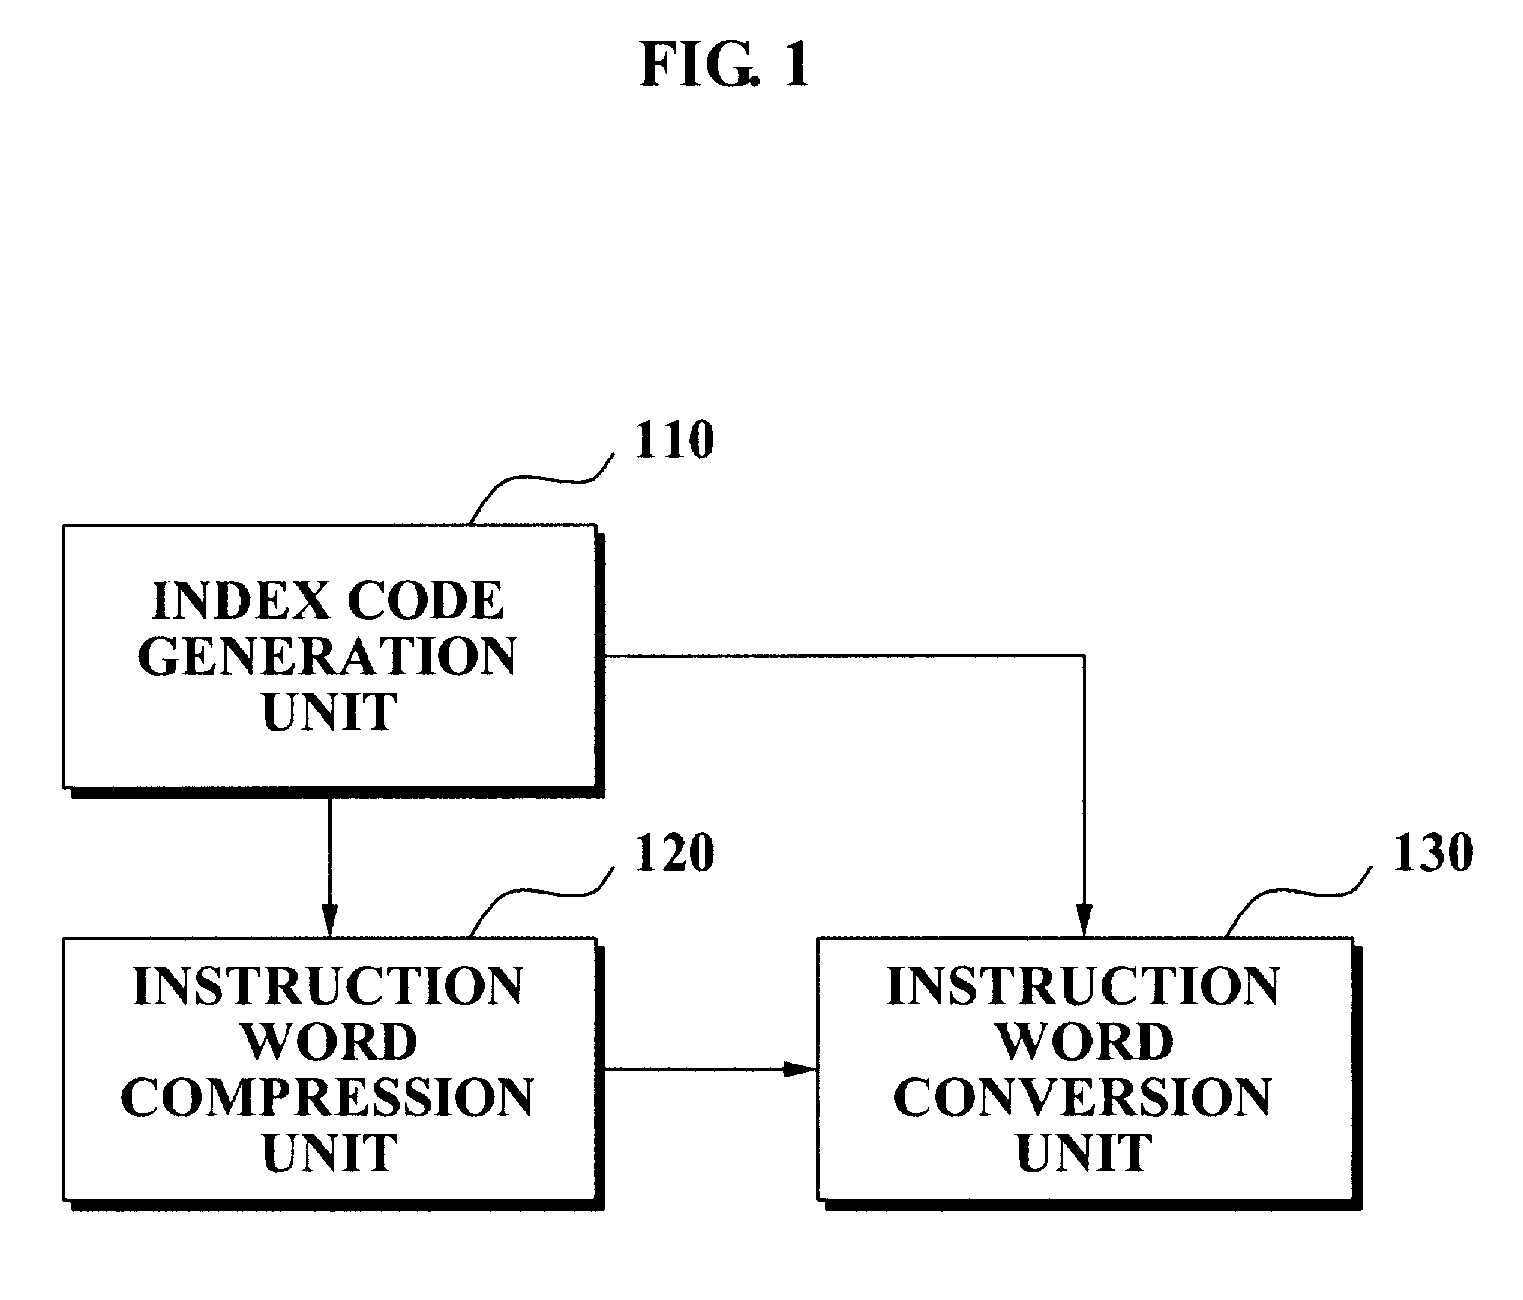 Apparatus for compressing instruction word for parallel processing VLIW computer and method for the same